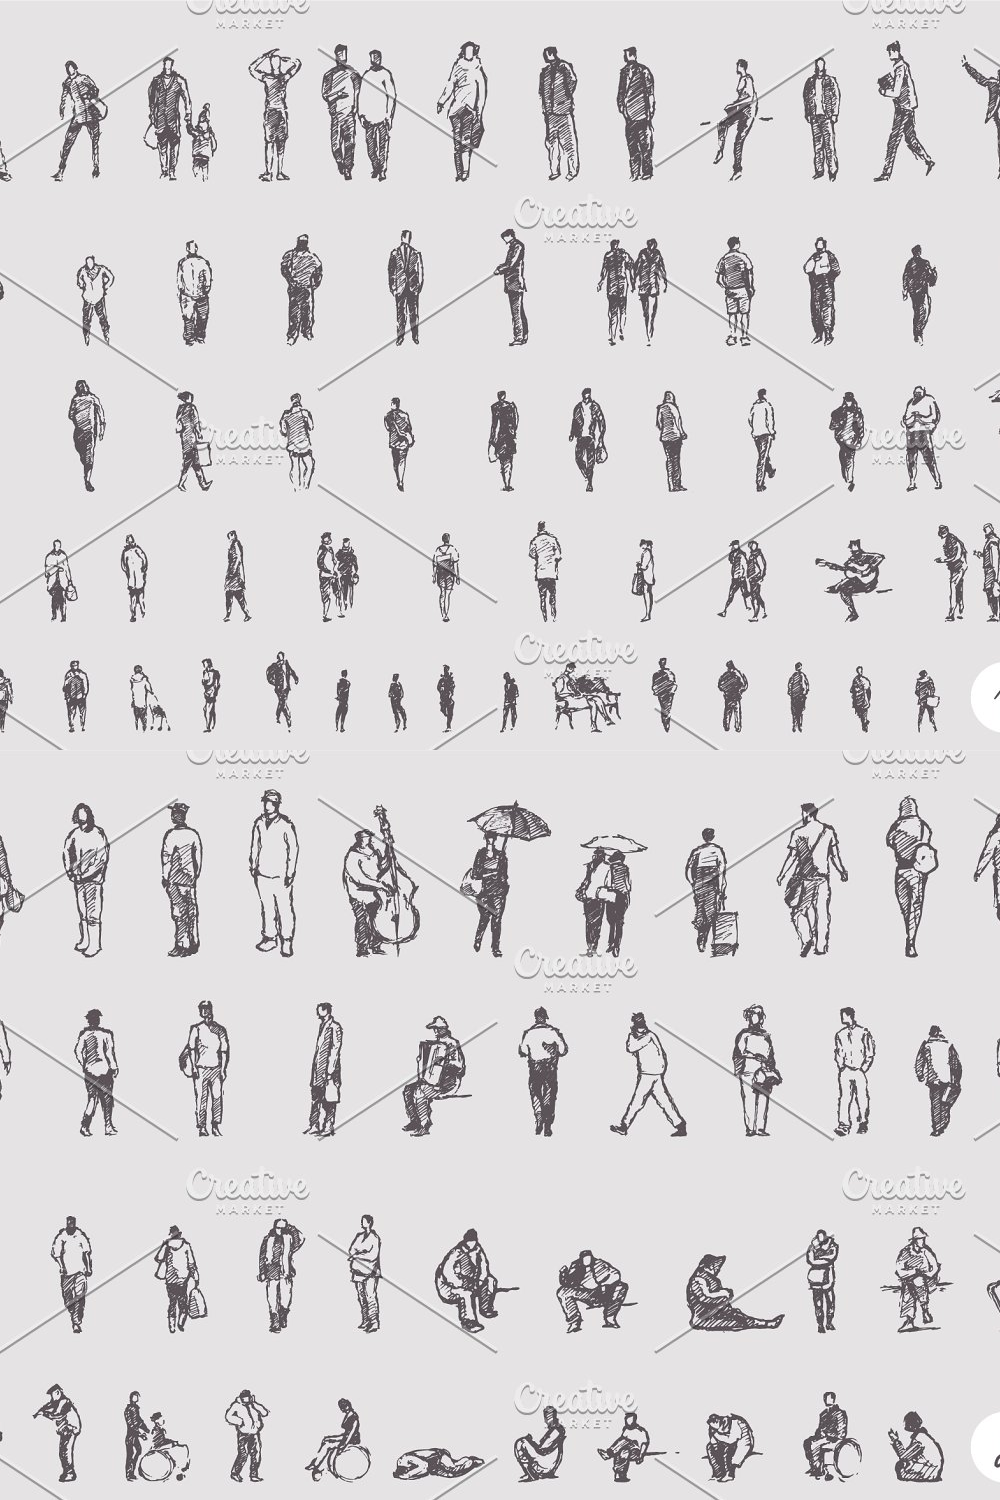 Illustrations big collection of sketches of people pinterest.